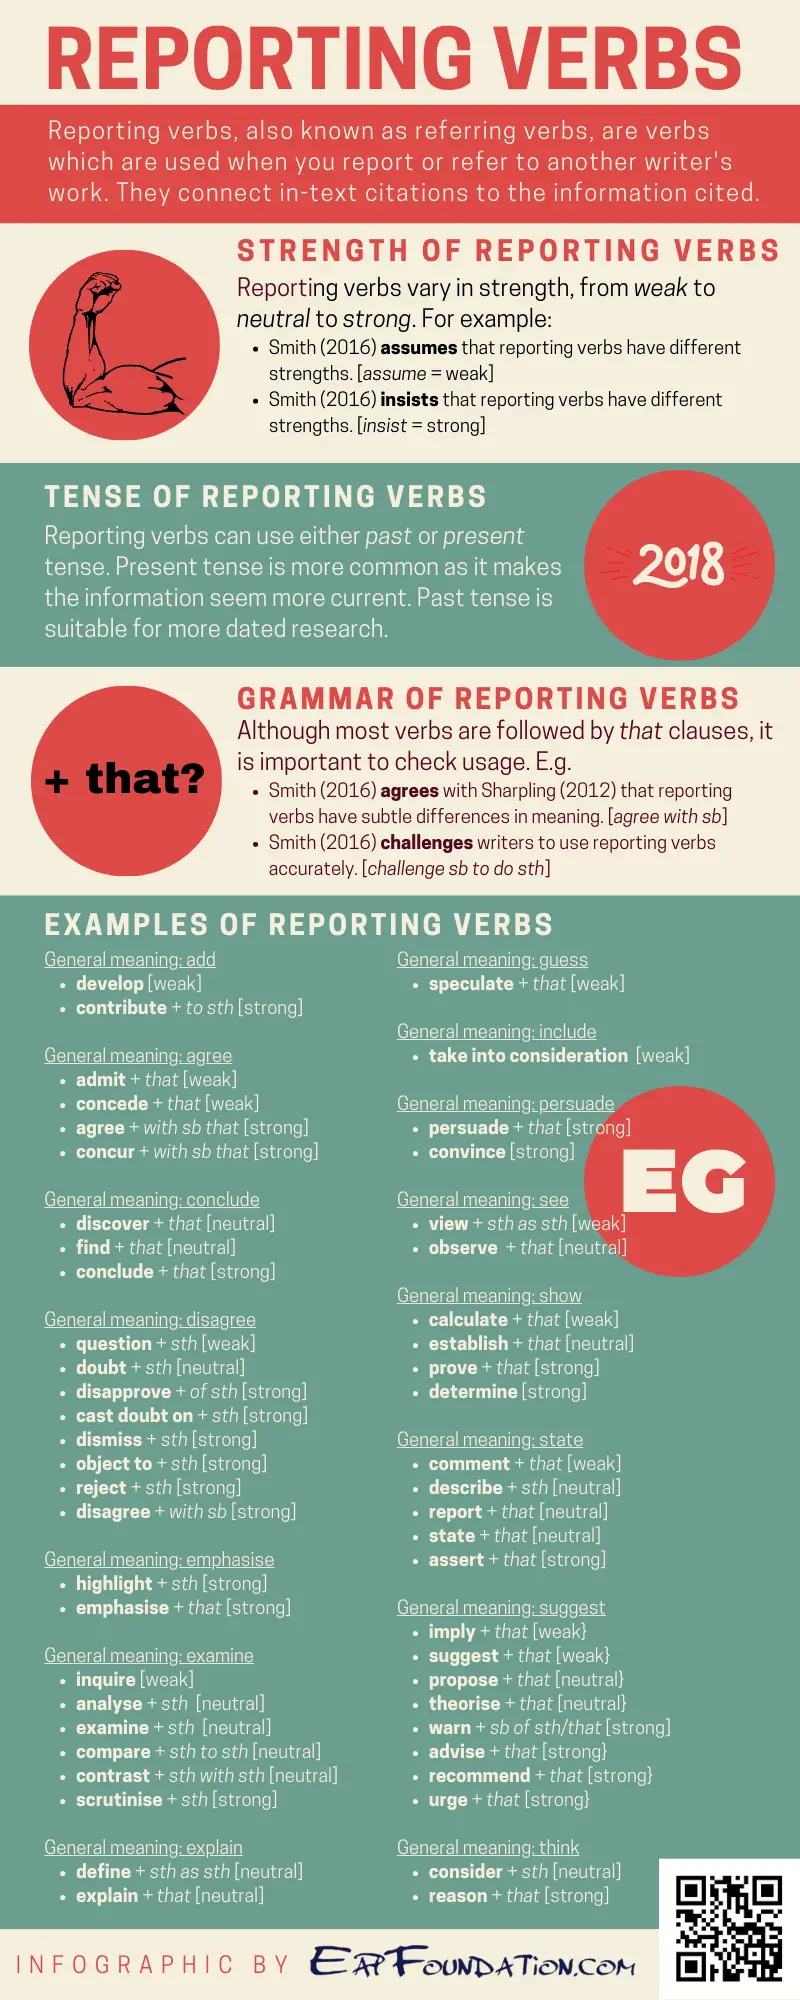 reporting-verbs-infographic